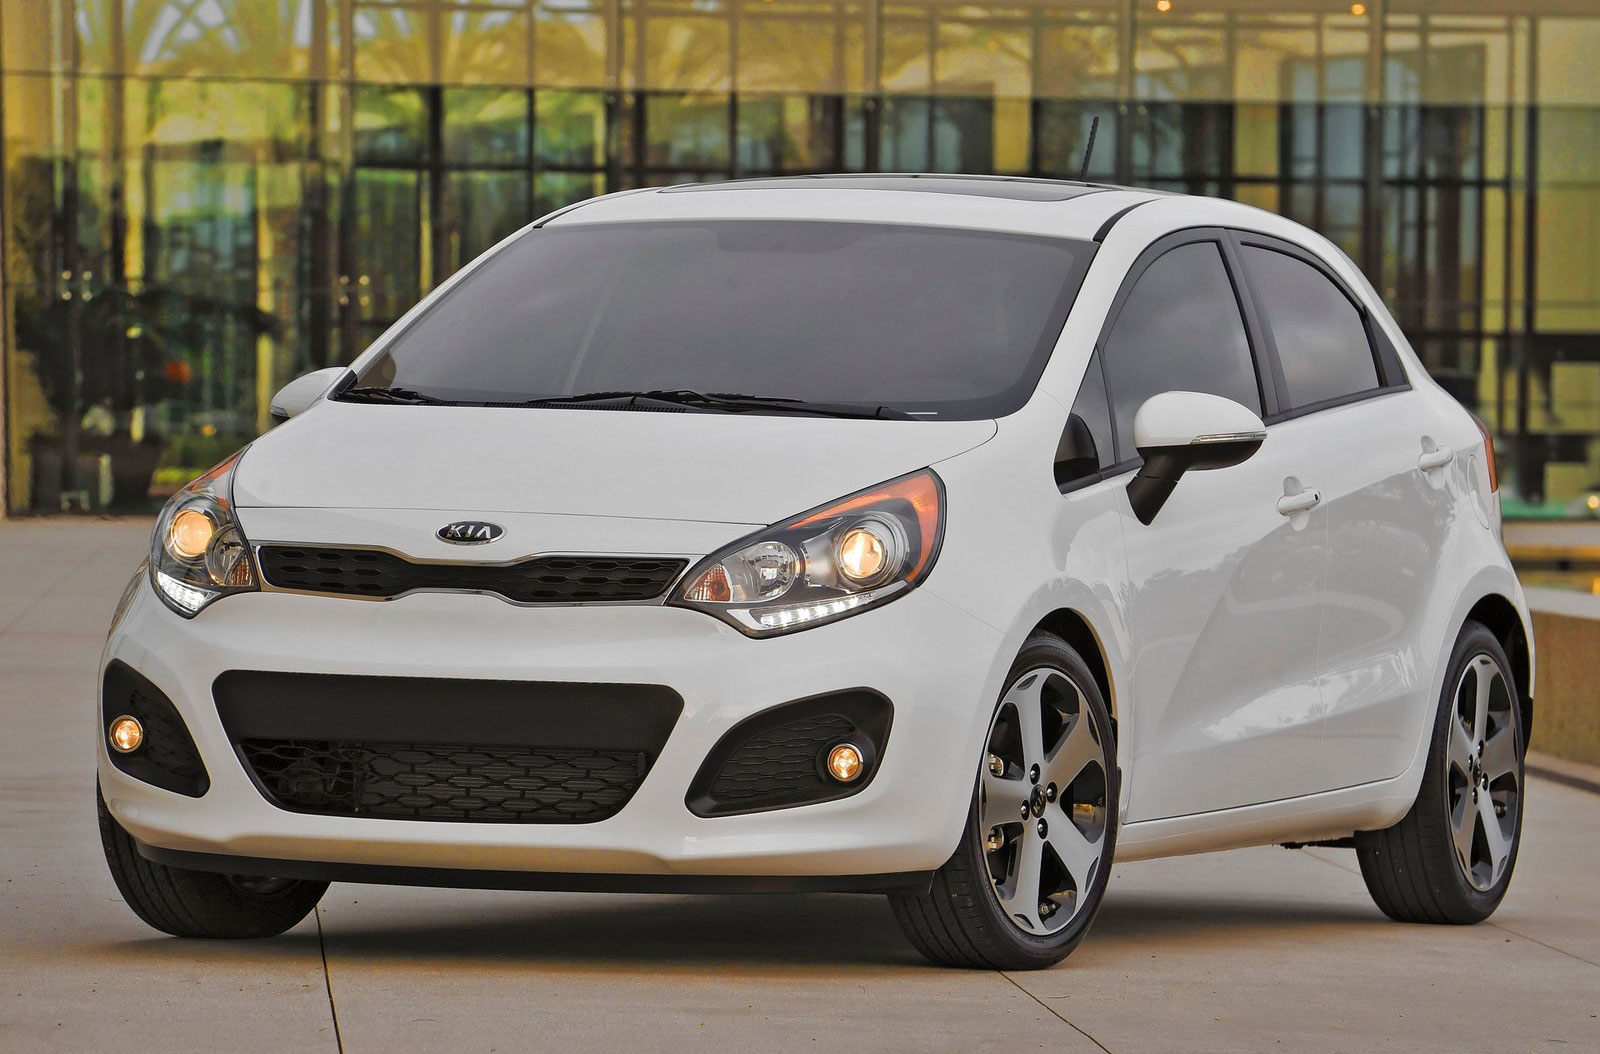 abseil thessaly  New Kia Rio hatch launching in Malaysia next month